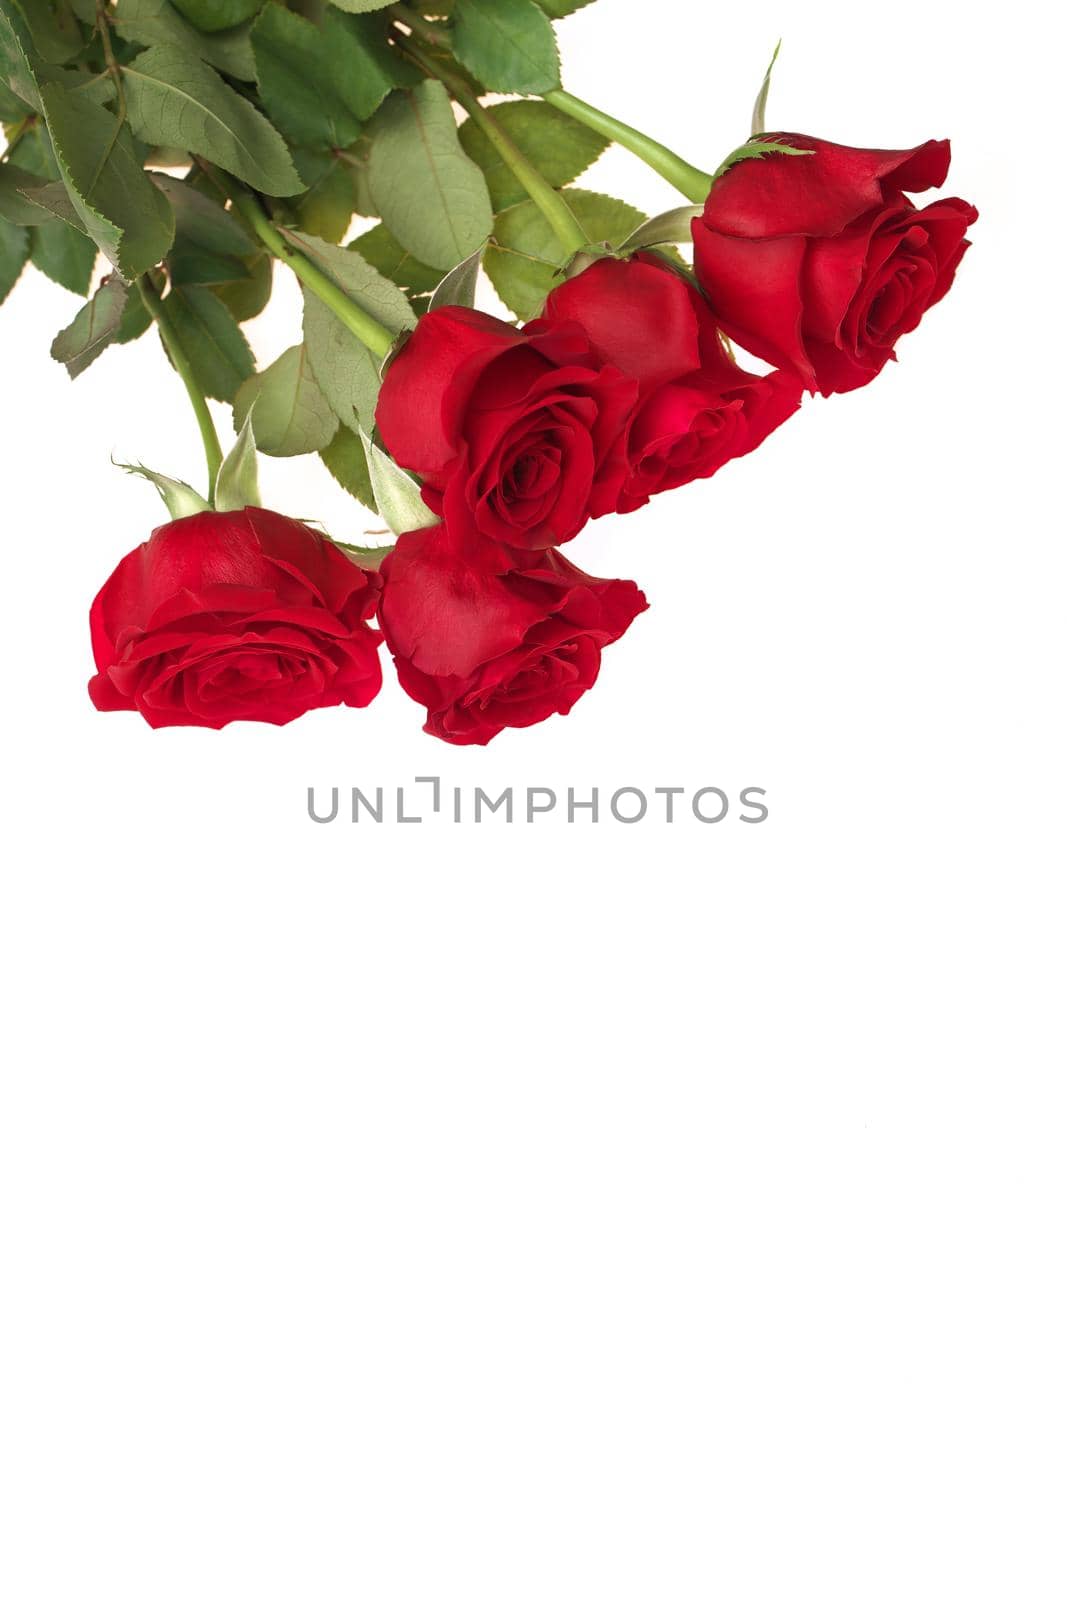 High Angle View of Red Rose Bouquet Isolated on a White Background. Copy space bottom. High quality studio photo